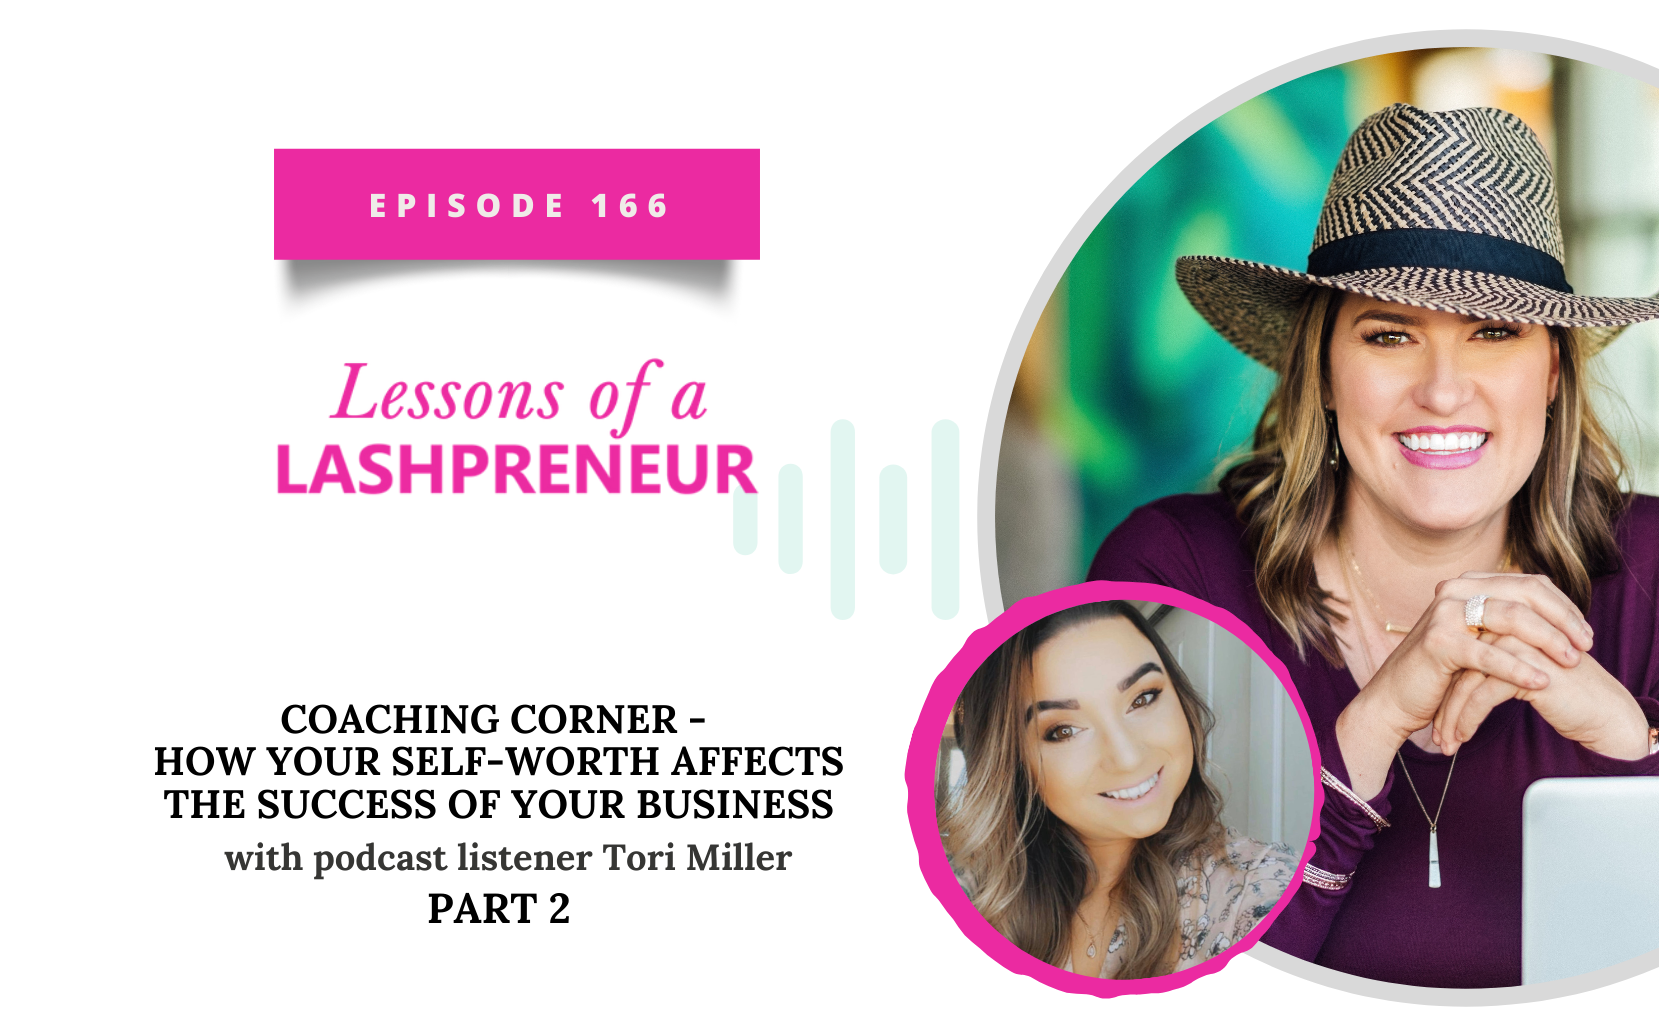 Coaching Corner: How Your Self-Worth Affects the Success of Your Business with podcast listener Tori Miller Part 2